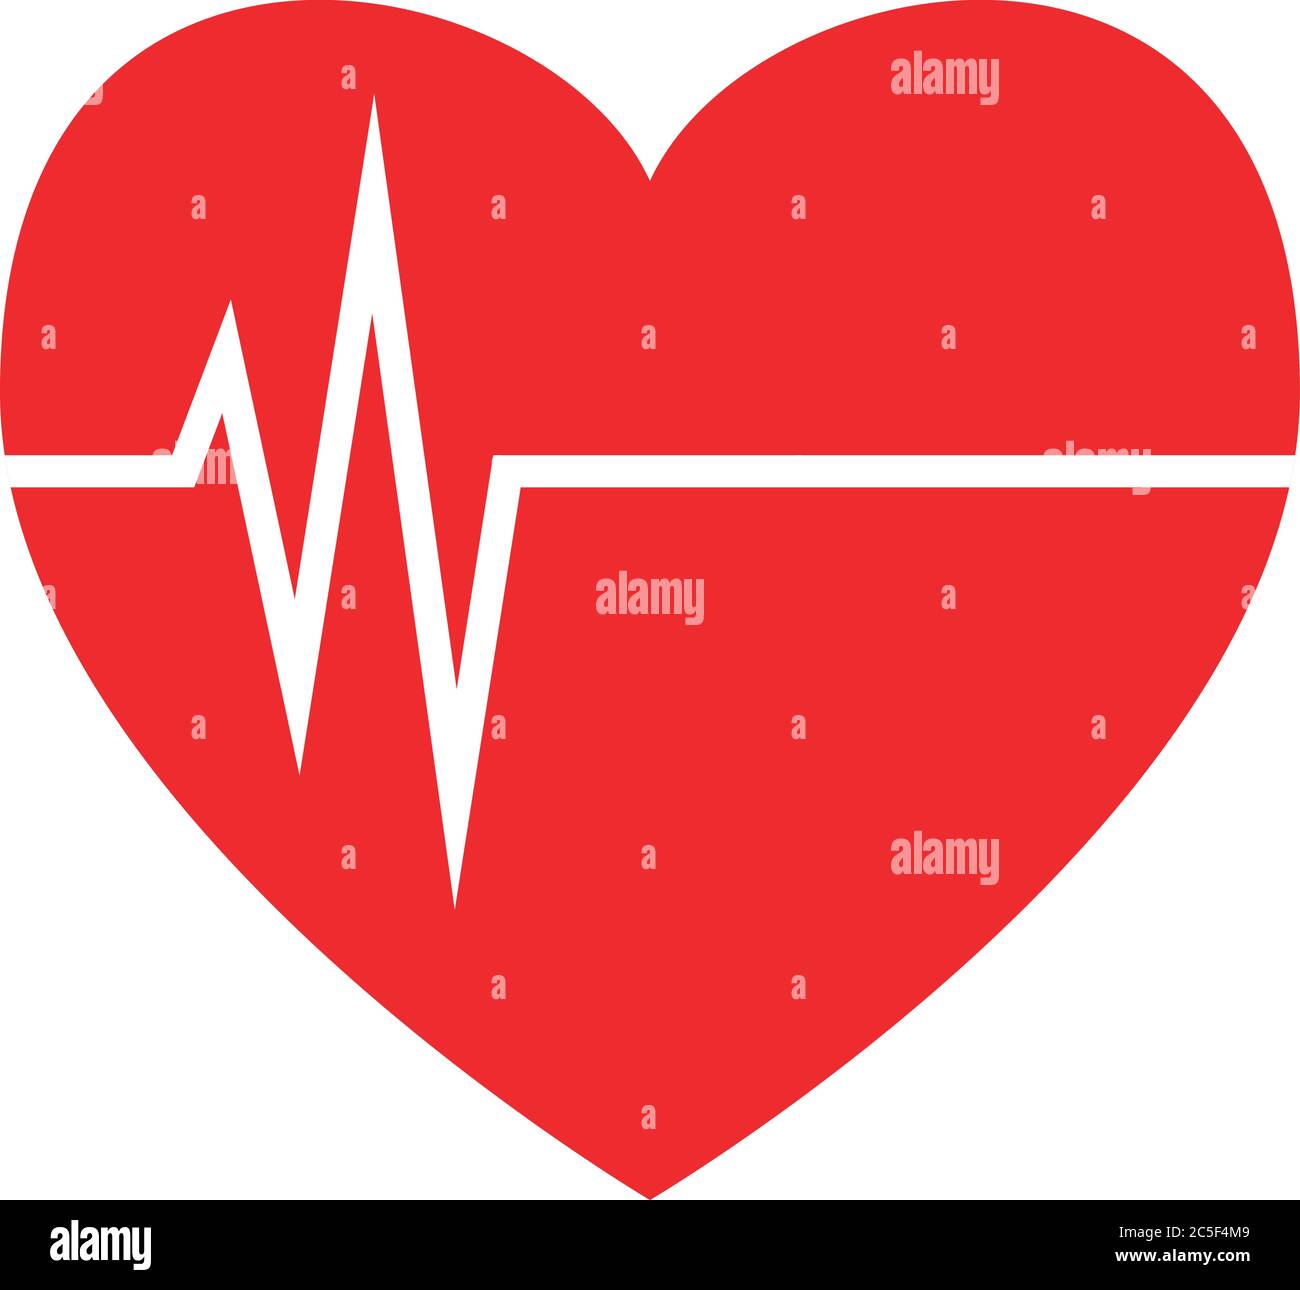 Heartbeat red heart with pulse icon life line health care illustration vector Stock Vector